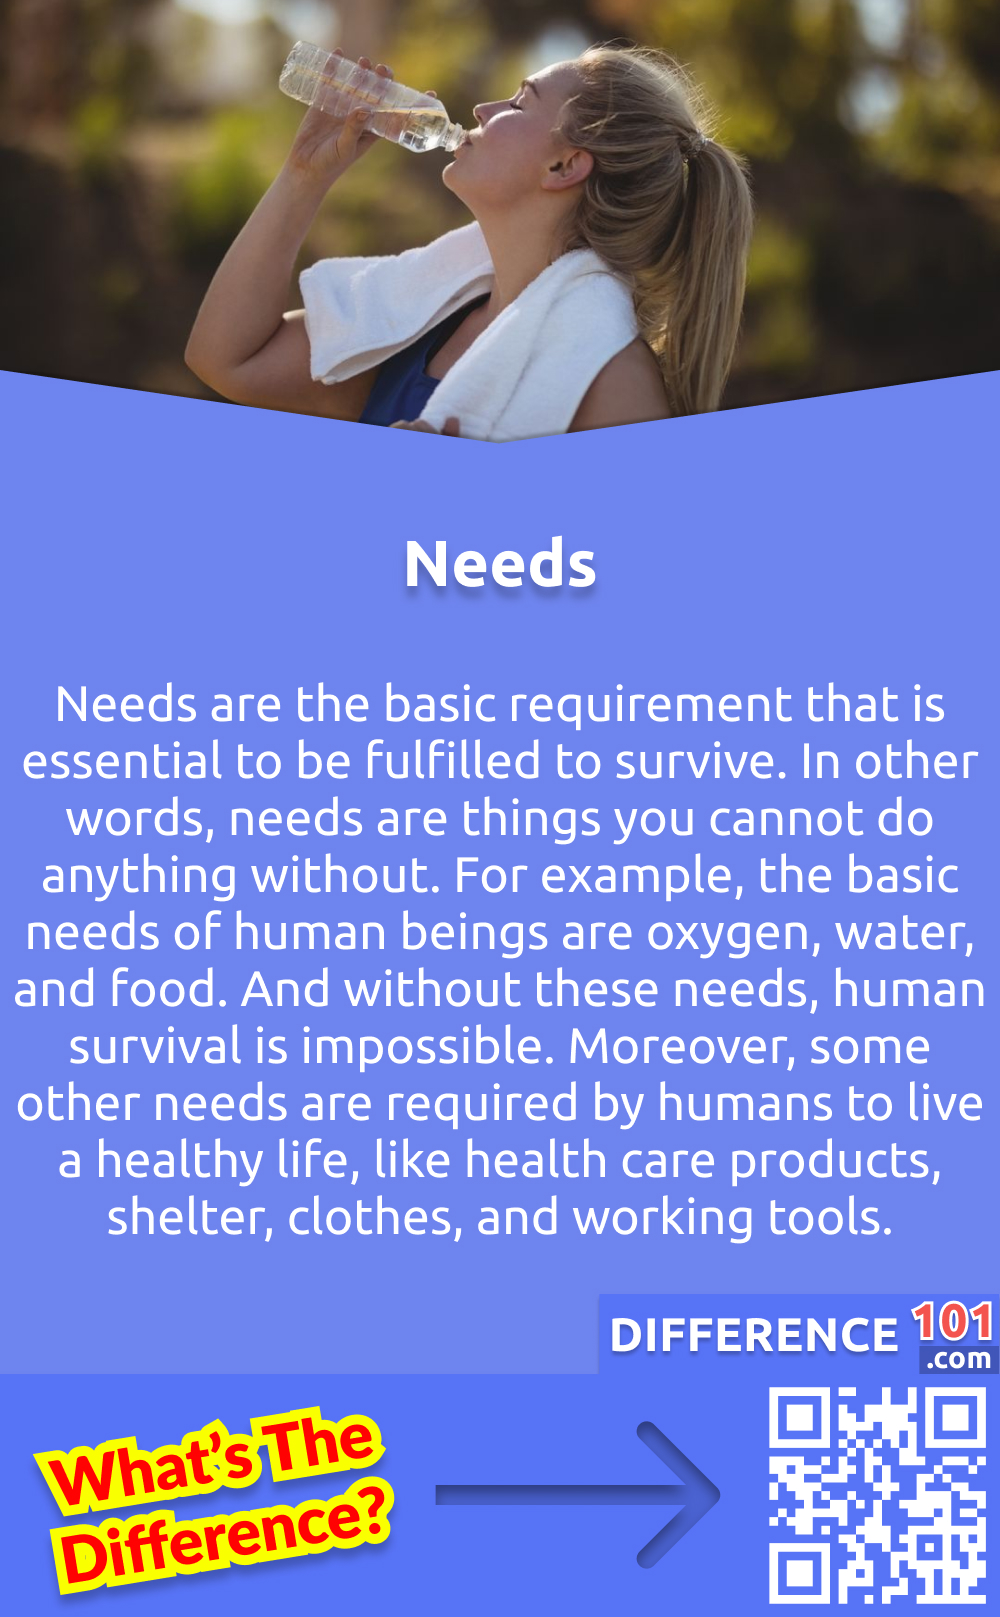 What Are Needs? Needs are the basic requirement that is essential to be fulfilled to survive. In other words, needs are things you cannot do anything without. For example, the basic needs of human beings are oxygen, water, and food. And without these needs, human survival is impossible. Moreover, some other needs are required by humans to live a healthy life, like health care products, shelter, clothes, and working tools.